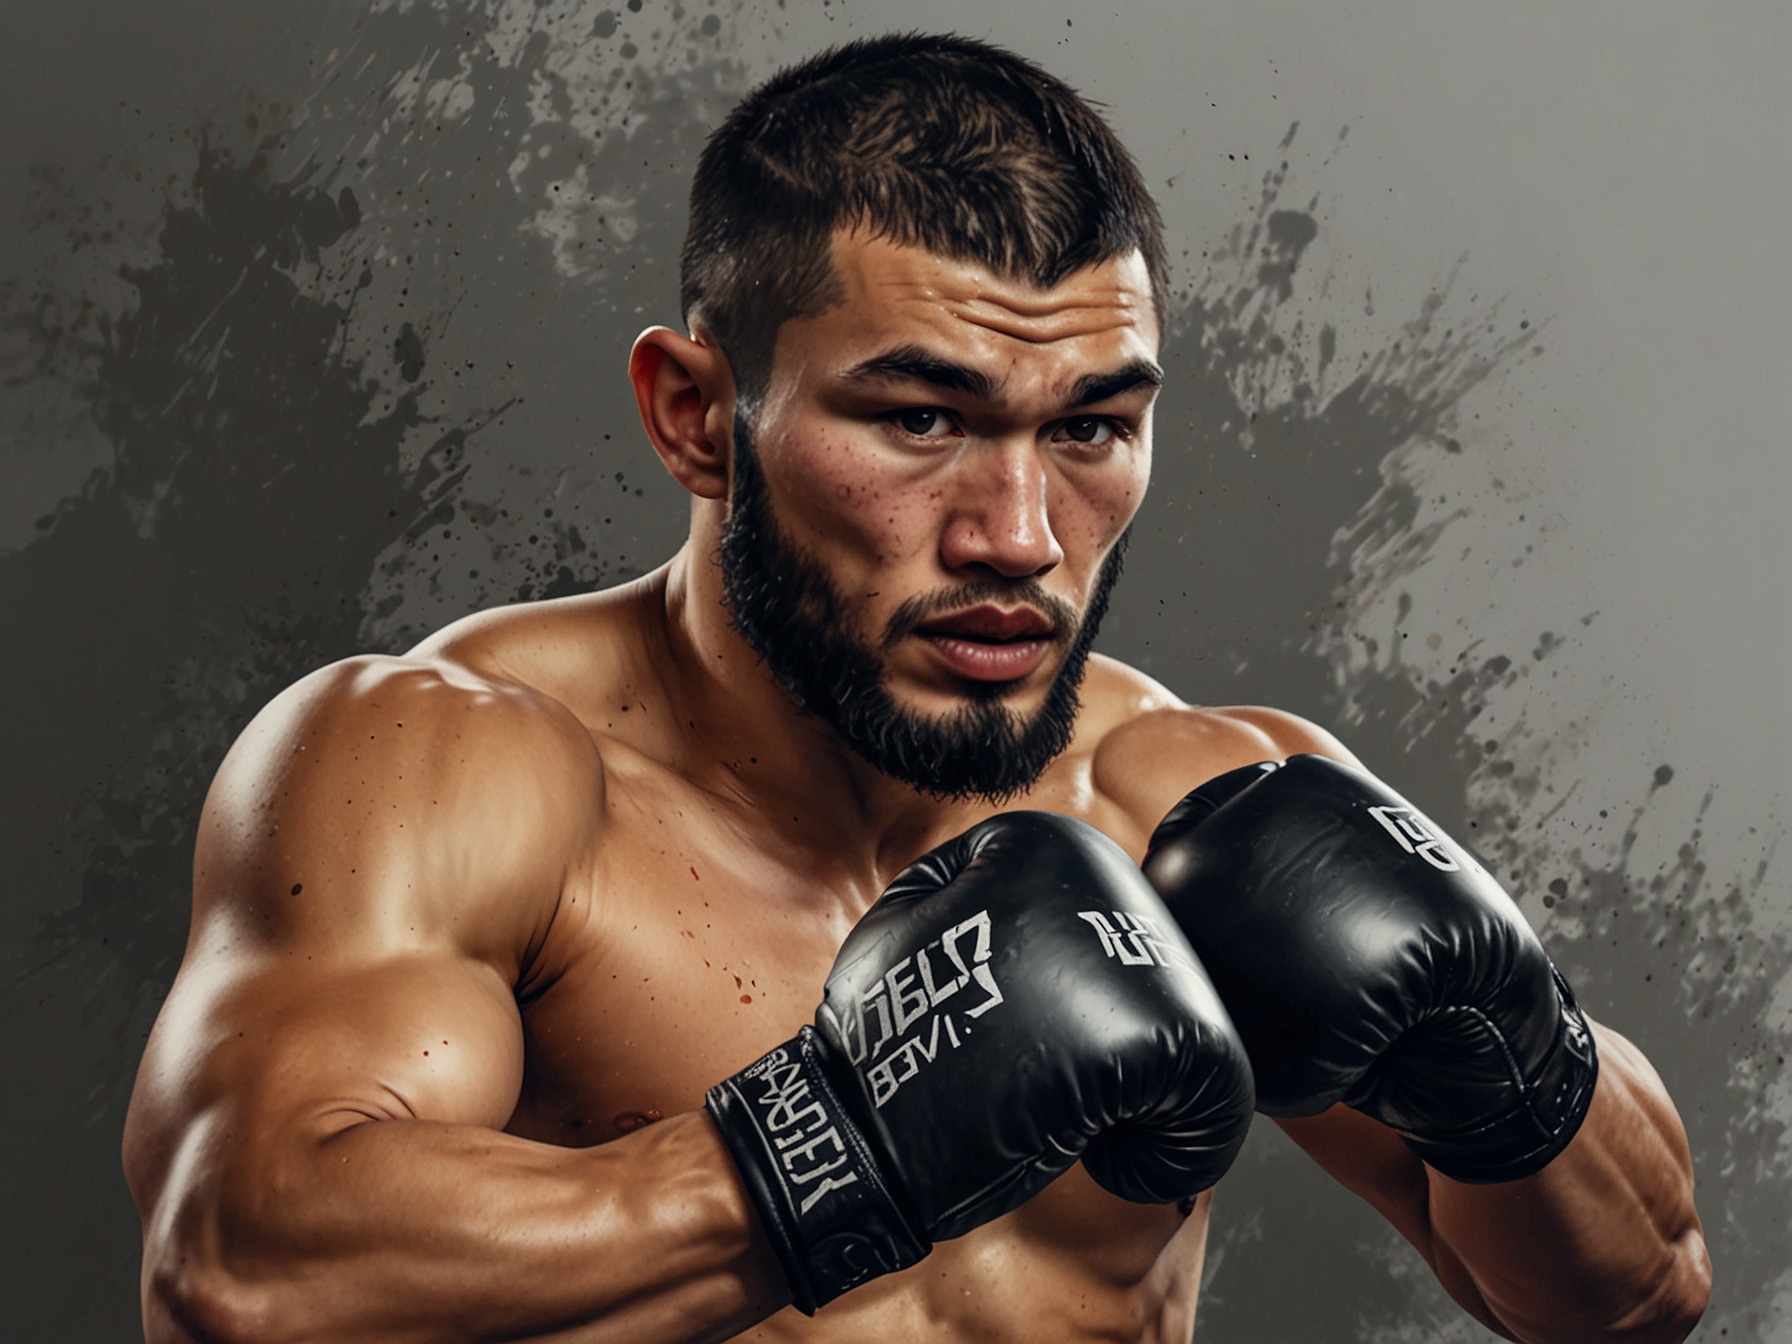 Khamzat Chimaev engaged in a rigorous training session, showcasing his relentless fighting style and preparation for the anticipated rescheduled bout against Robert Whittaker.